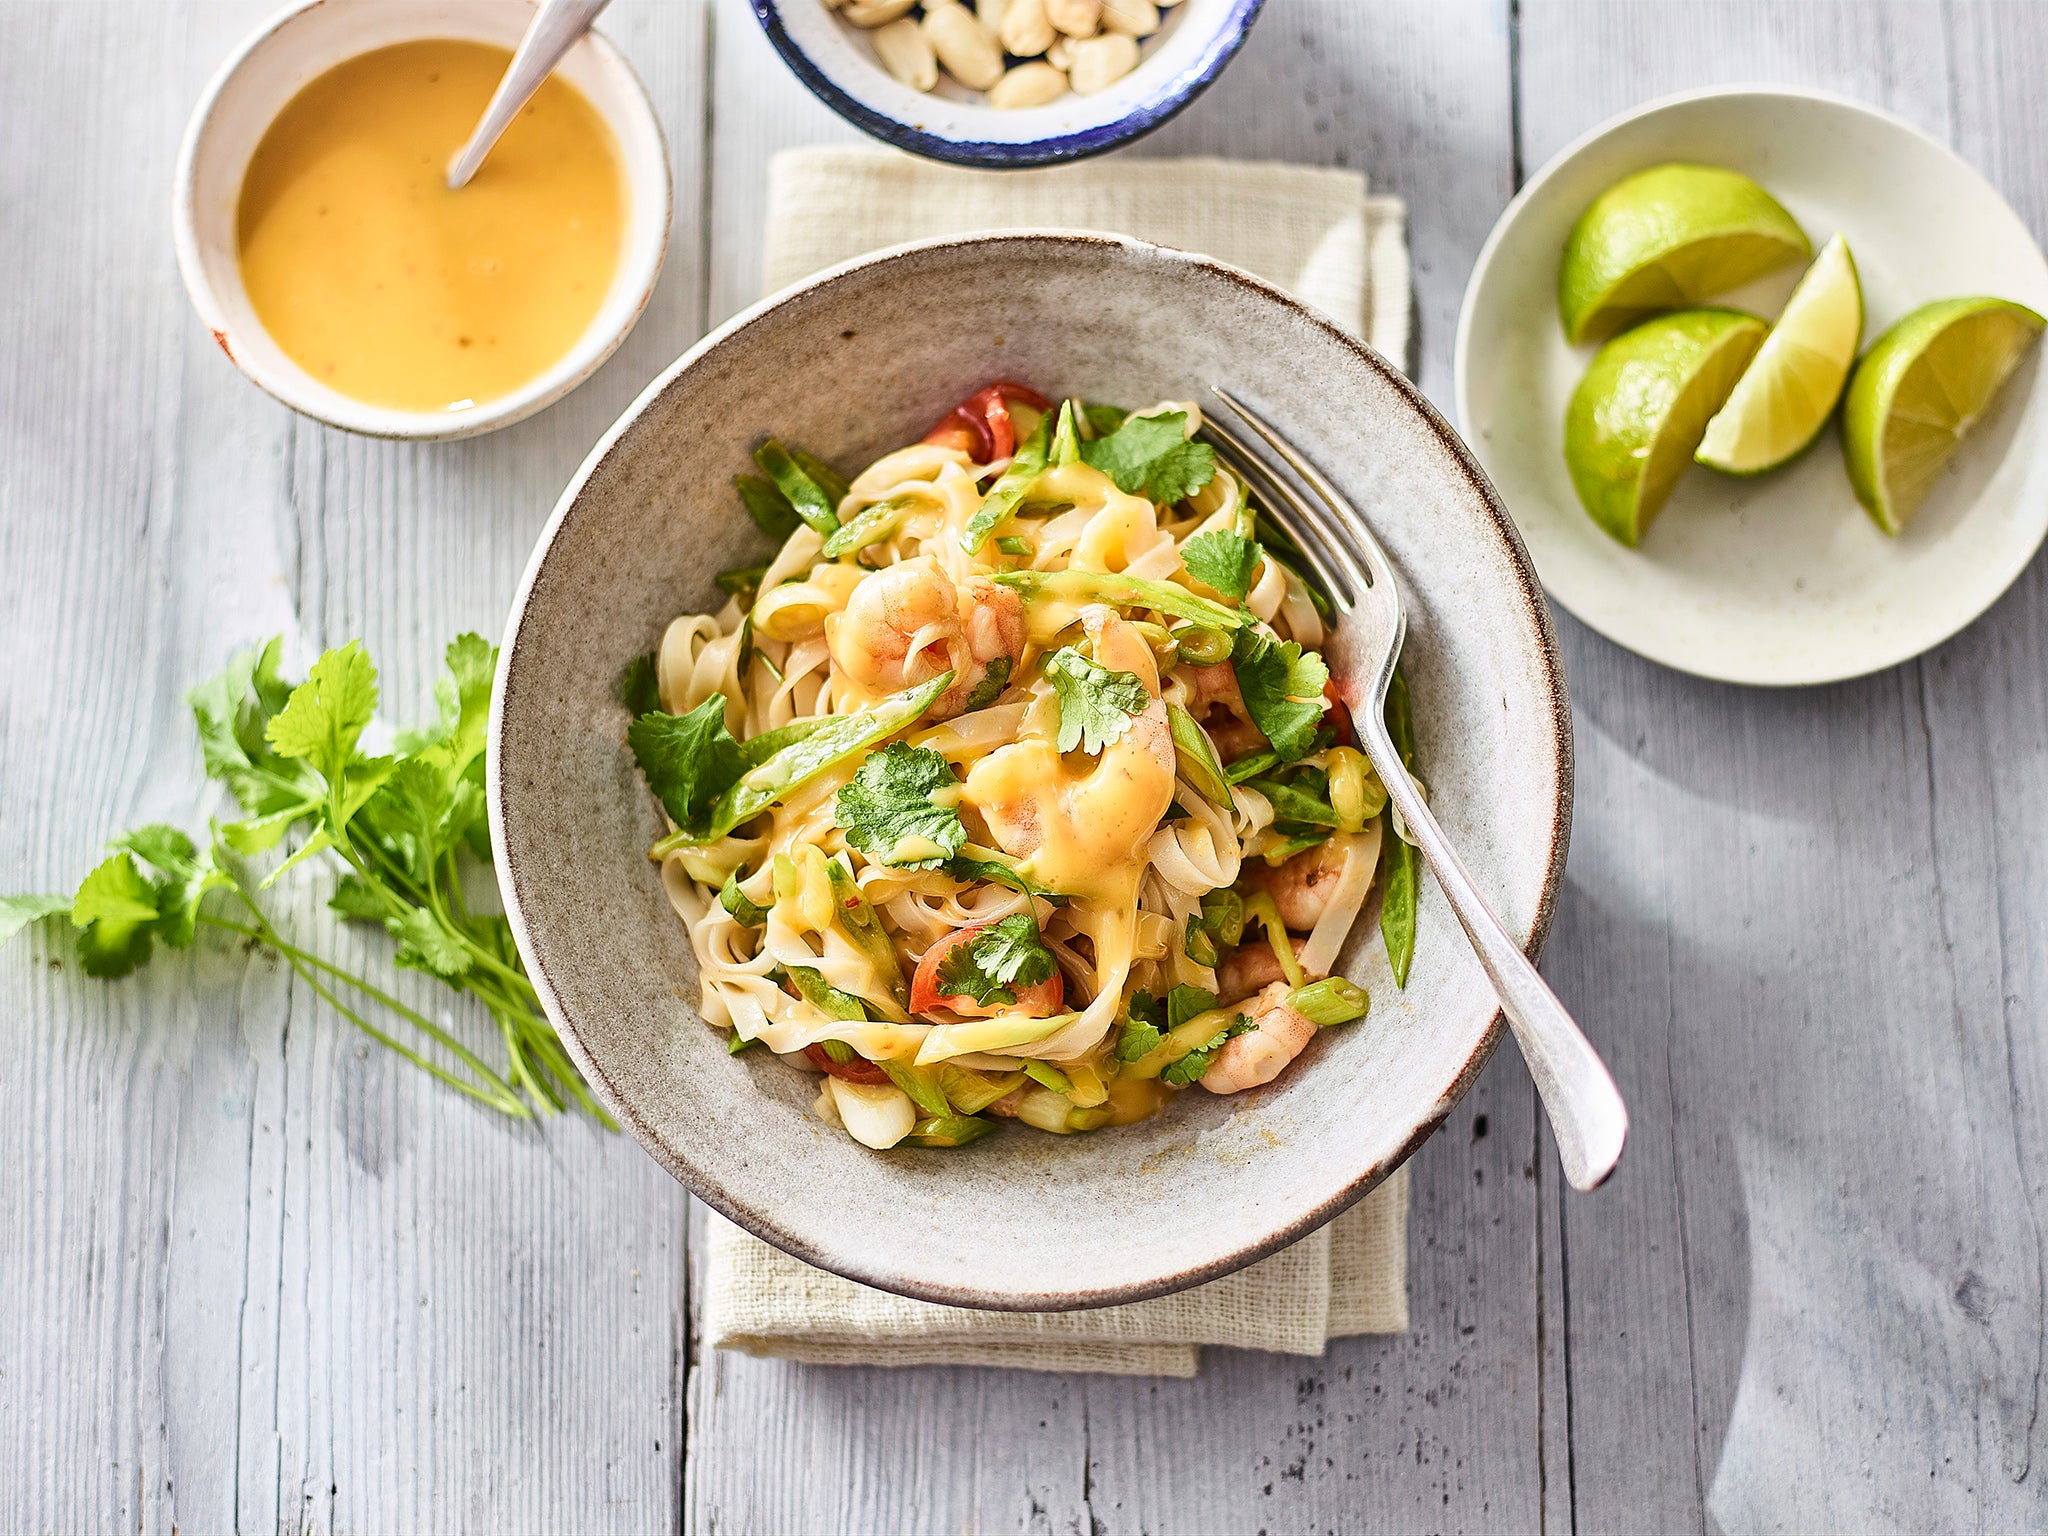 Quick and easy to prepare, this Asian-style salad is the perfect midweek meal